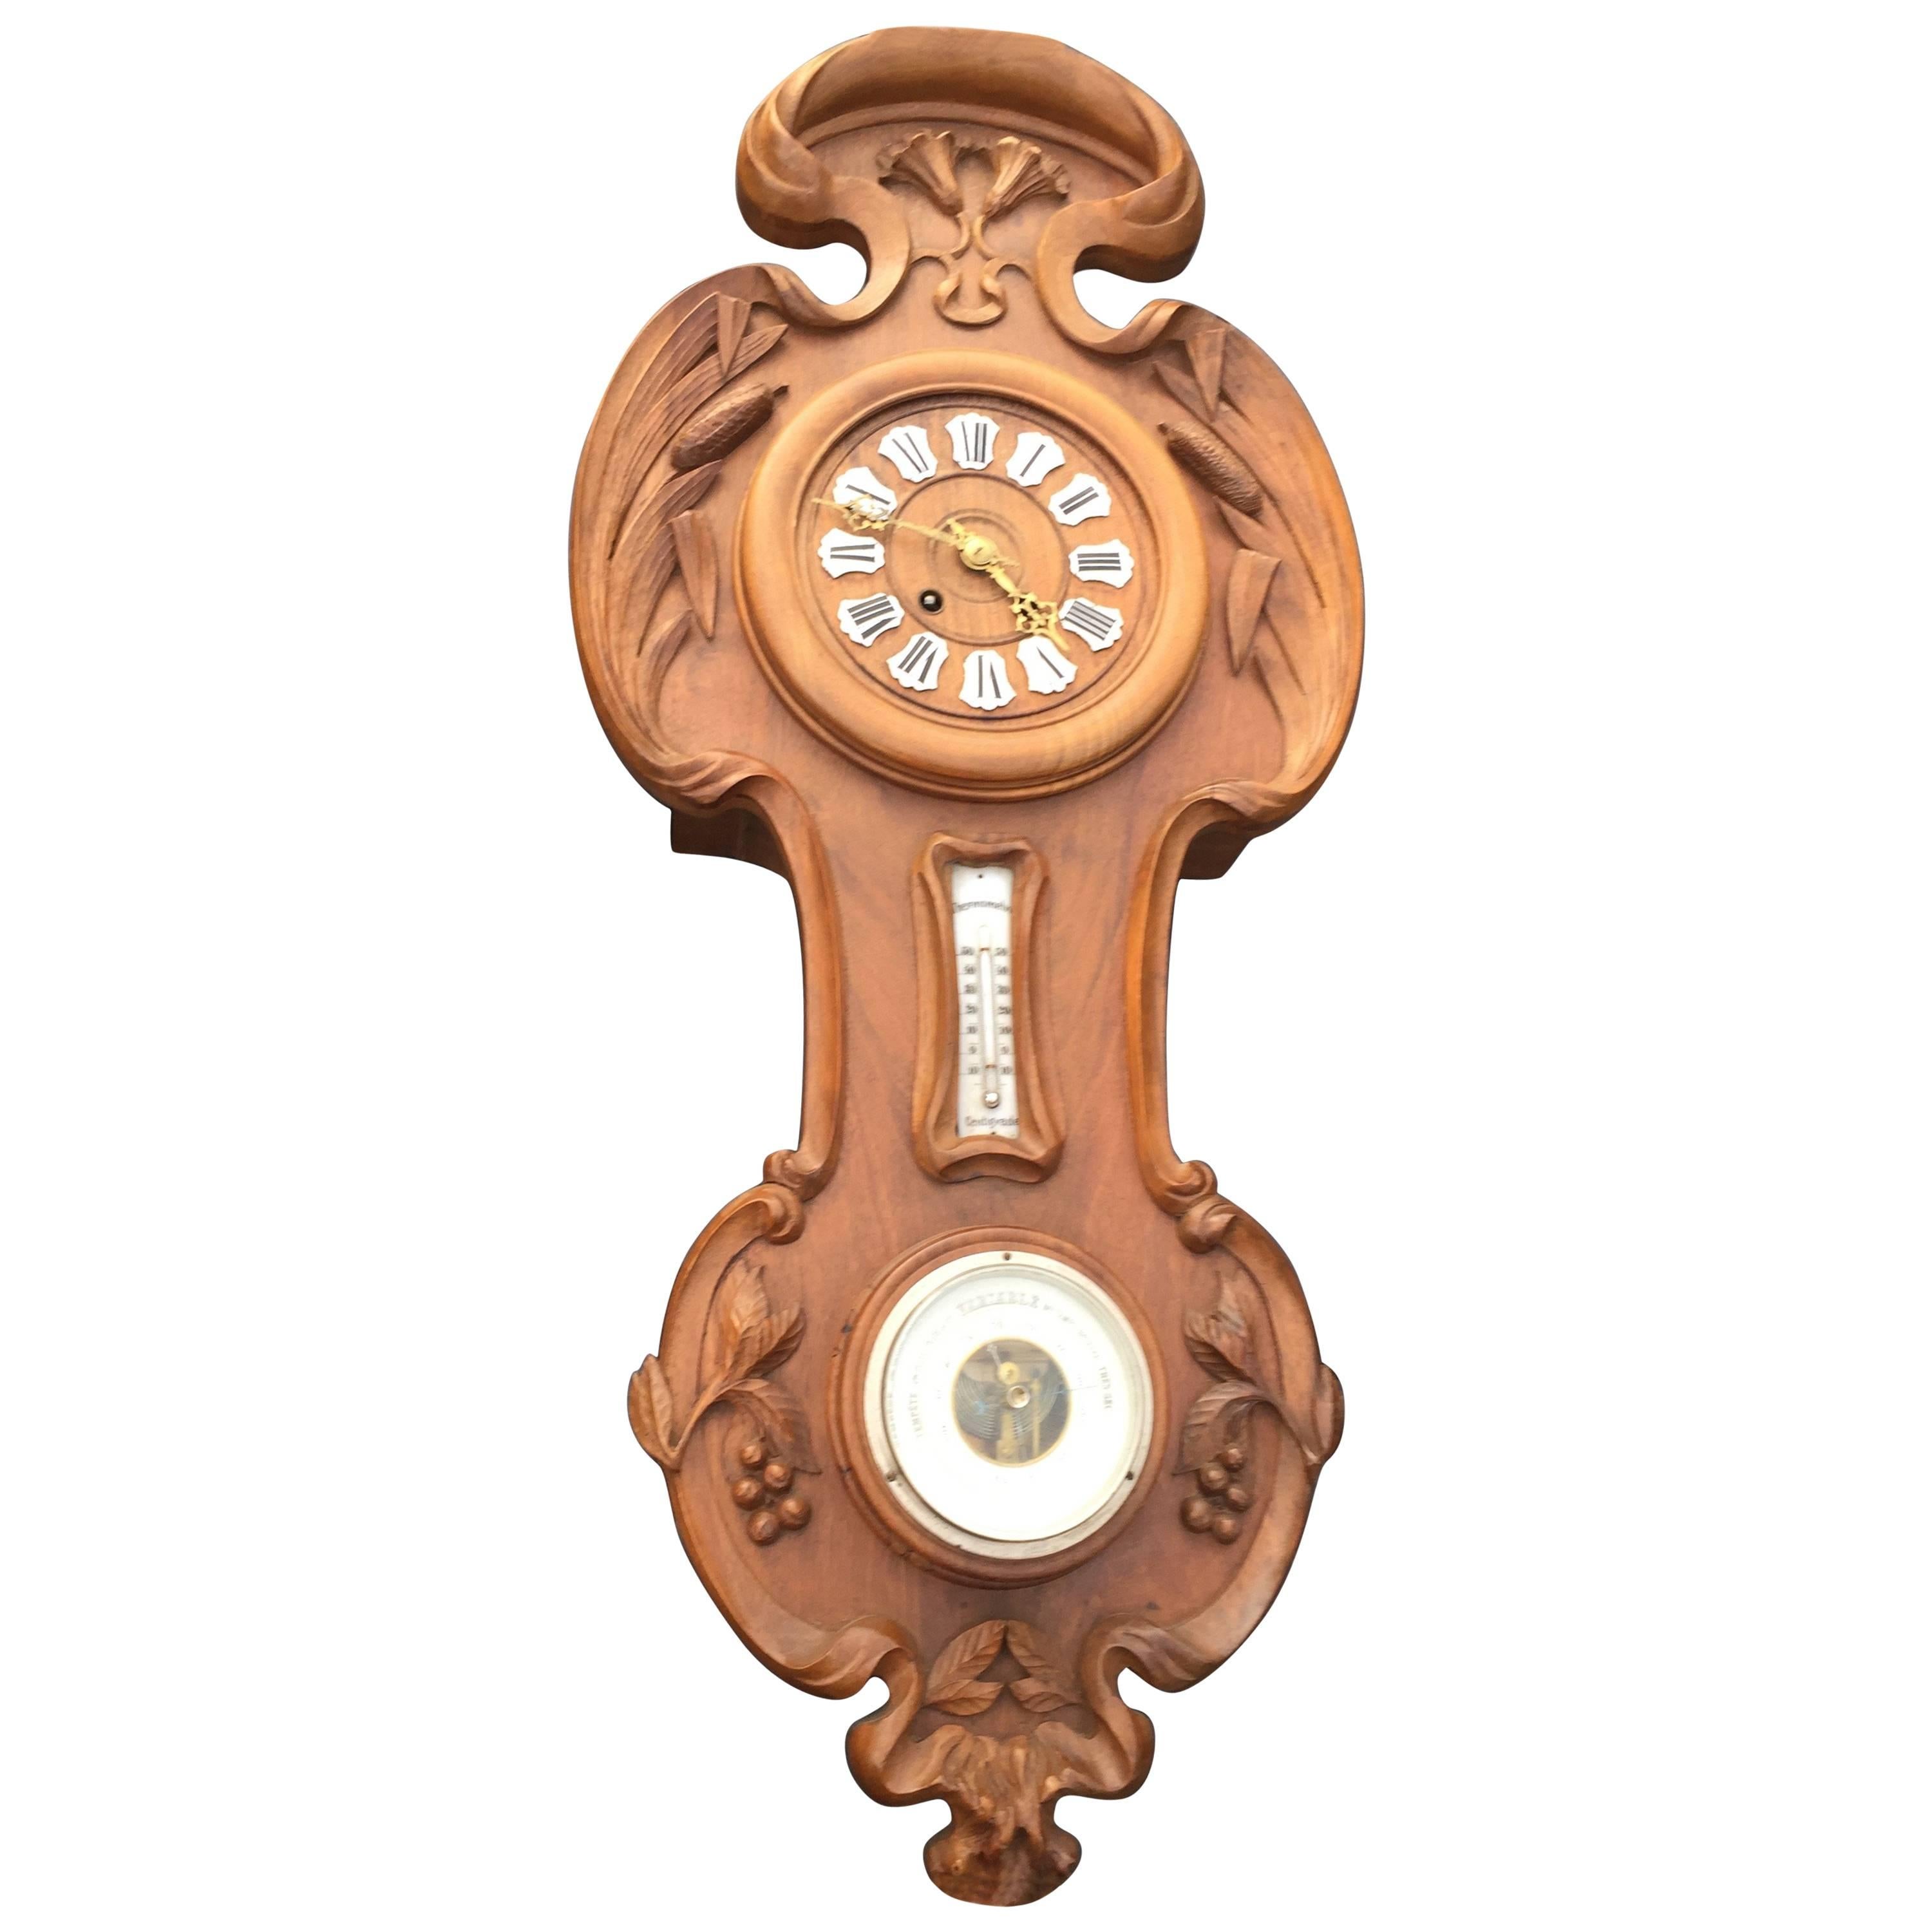 Early 20th century, good size Art Nouveau wall clock. 

This antique weather station hand carved and stunning Art Nouveau clock has a beautiful color / patina and it is in wonderful condition. . .from top to bottom. The organic and floral Art